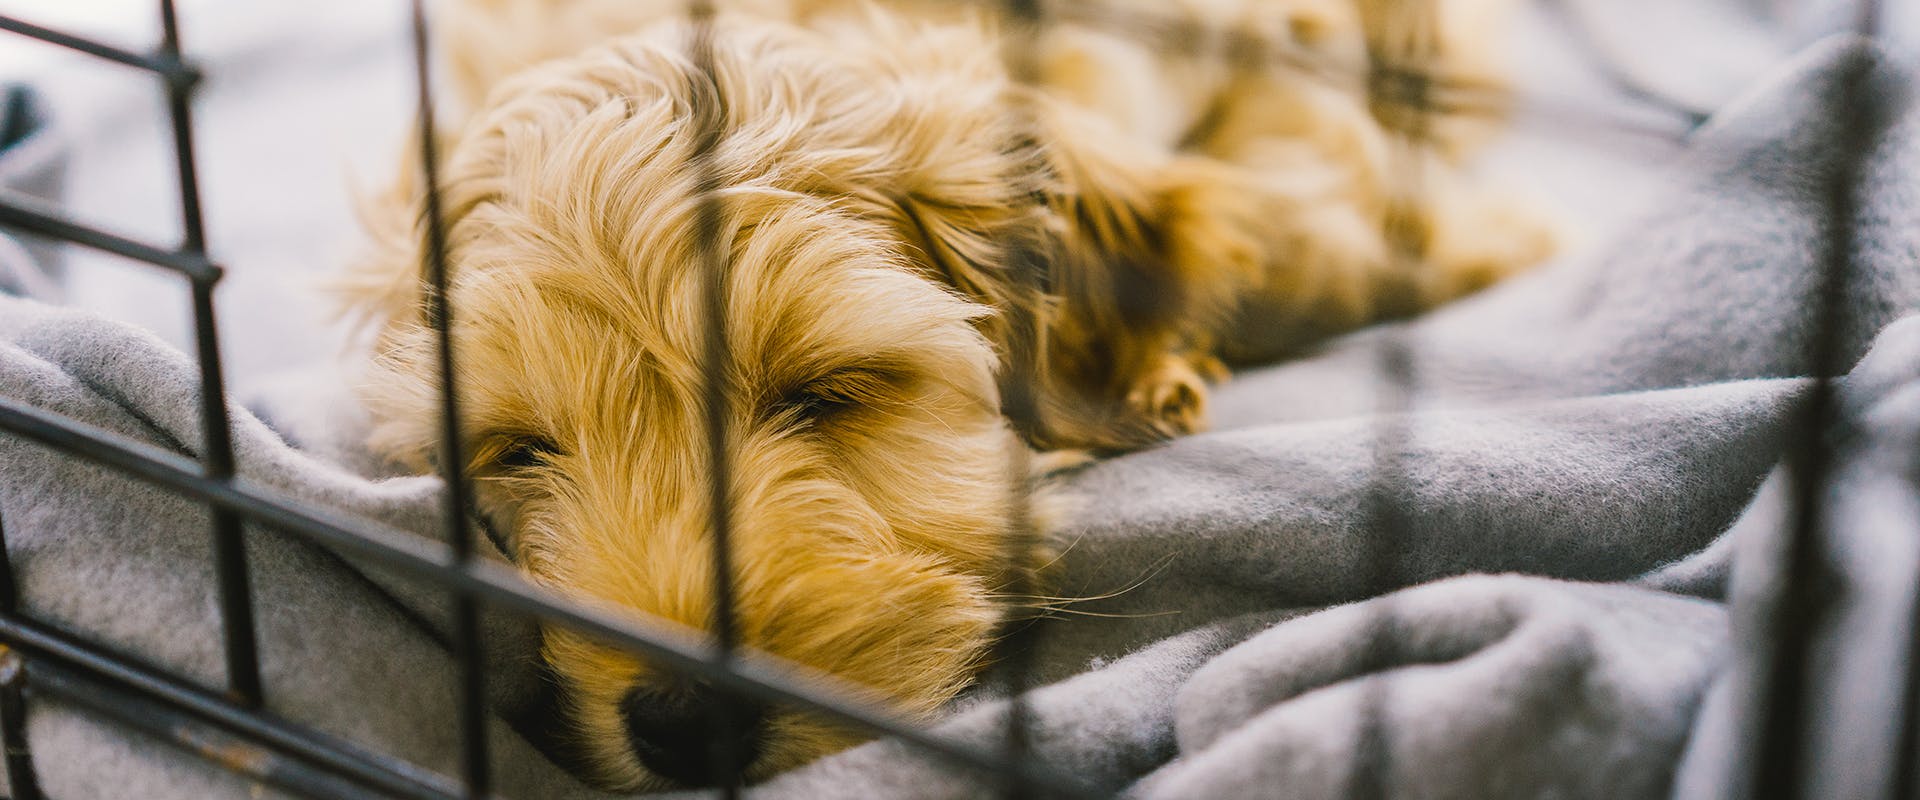 A puppy laying in a dog crate, sleeping soundly